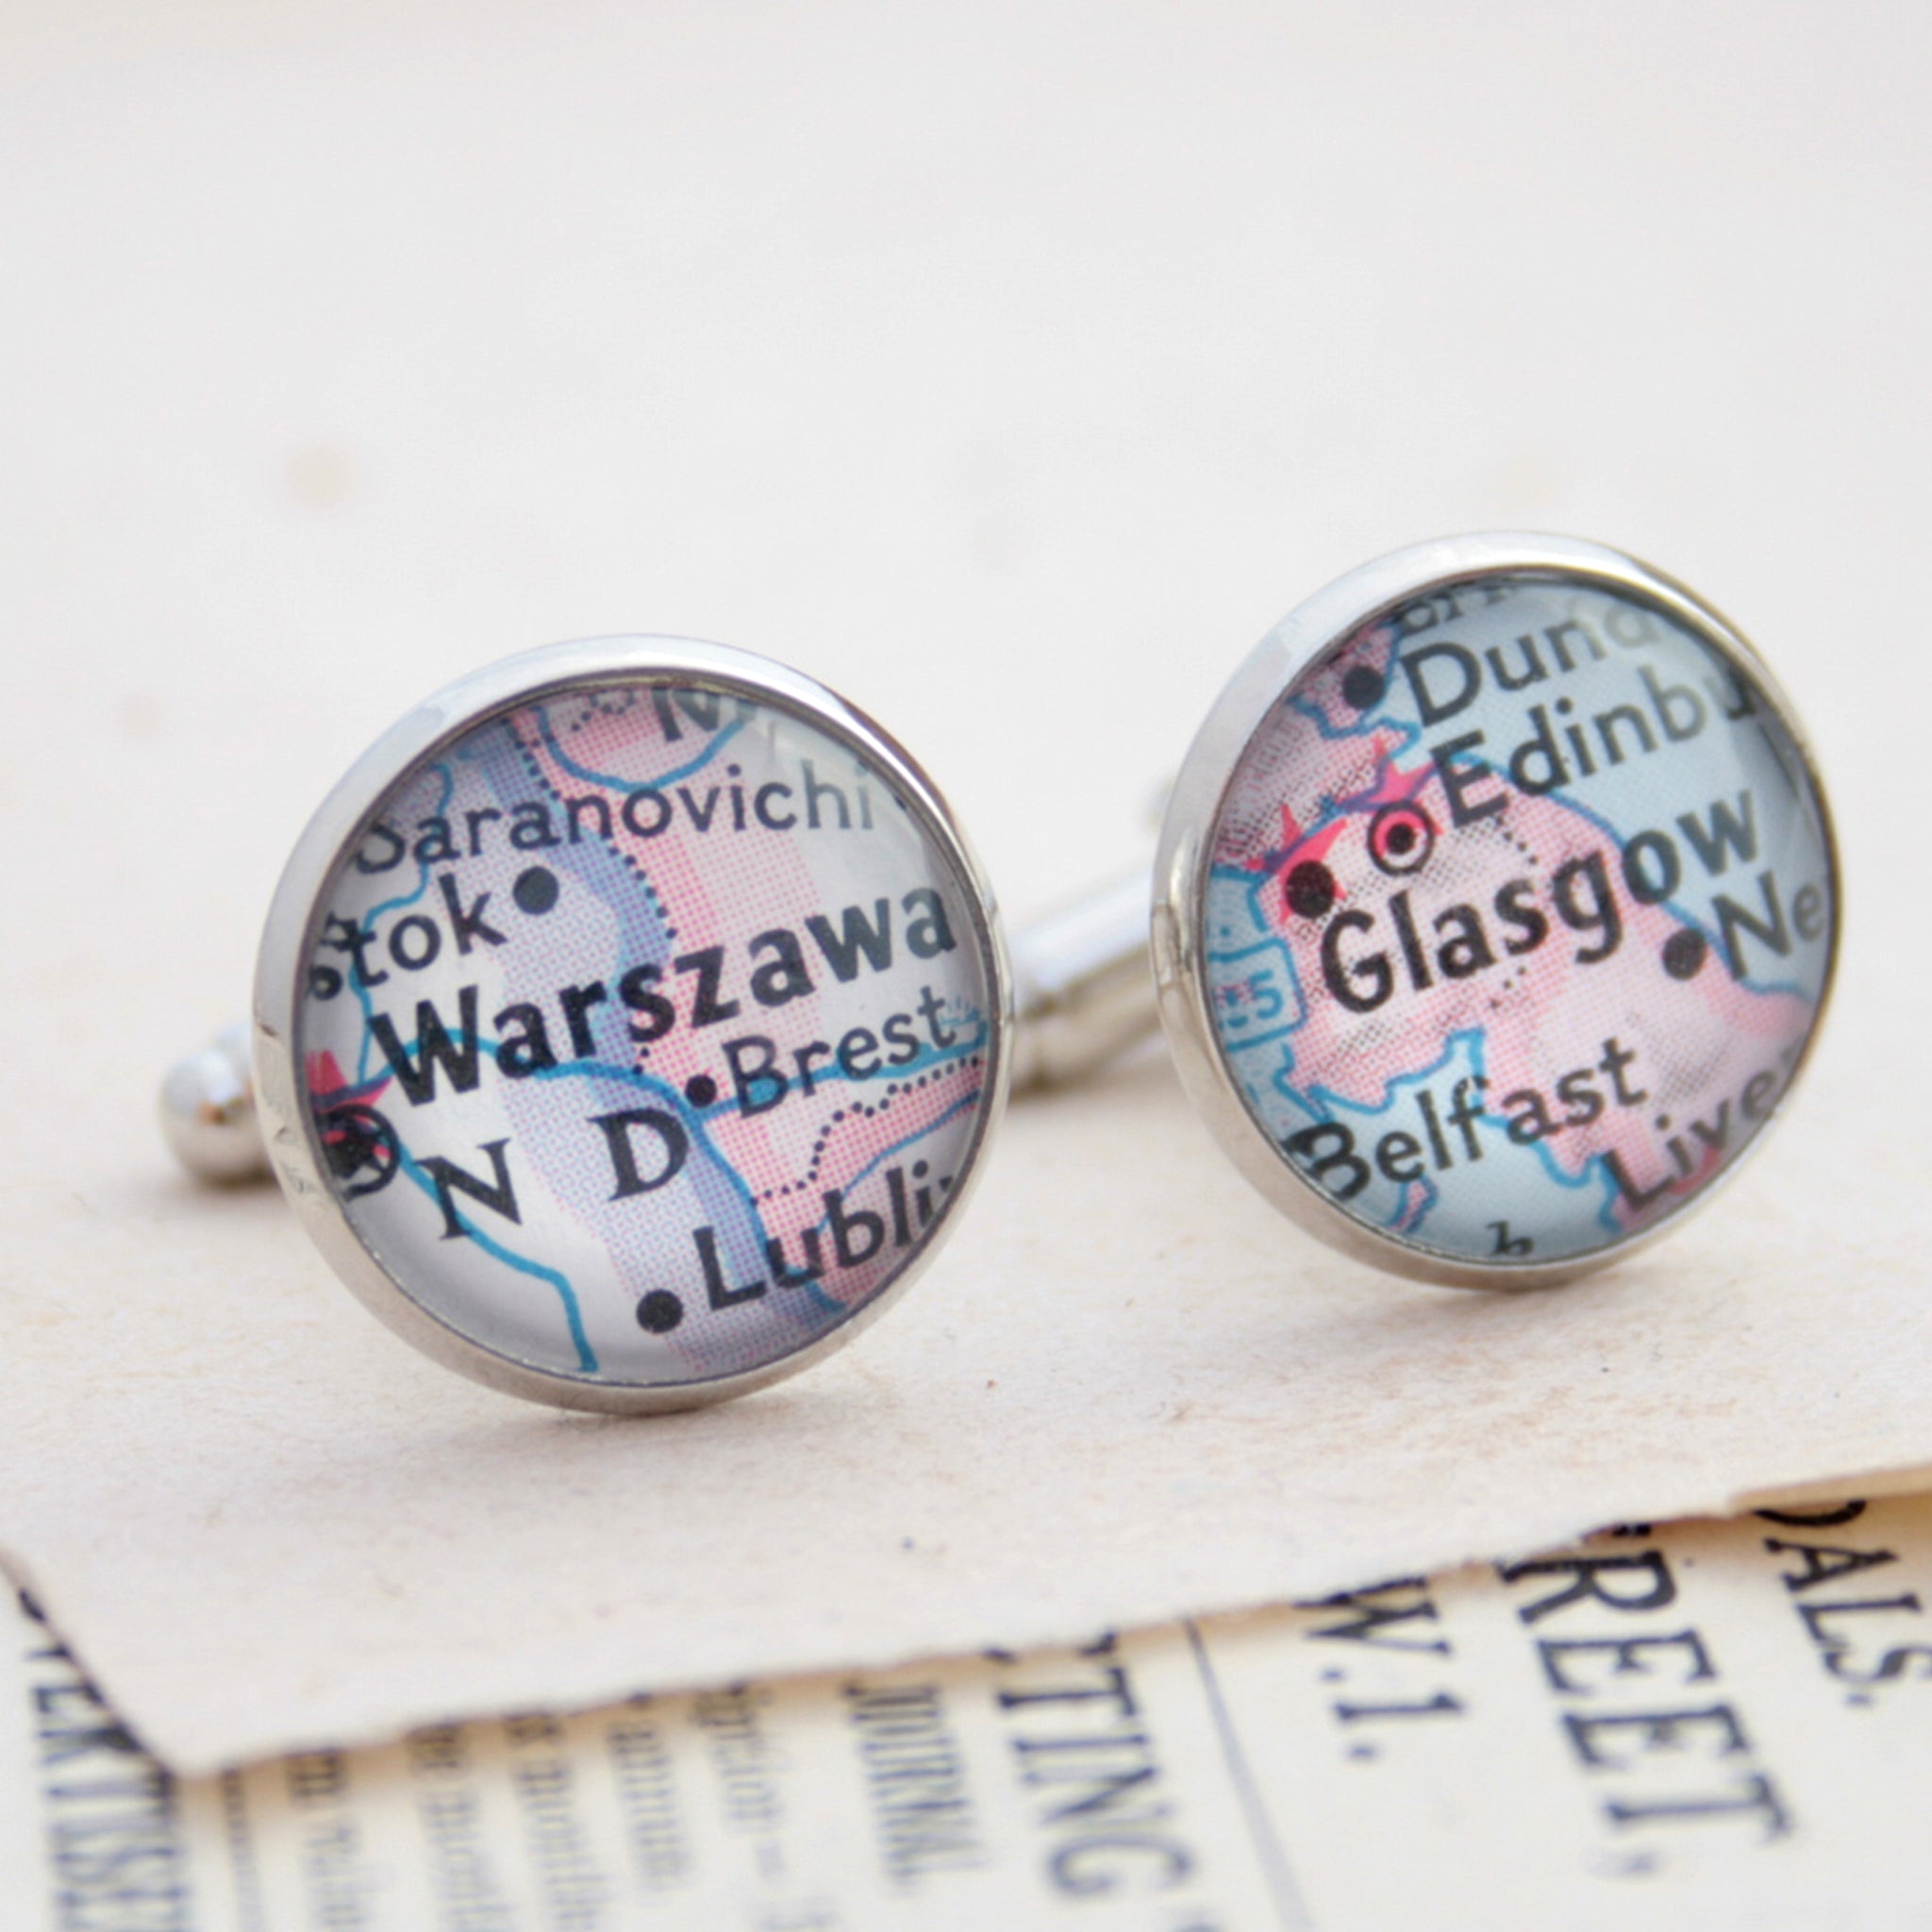 Personalised map cufflinks in silver tone featuring maps of Warszawa and Glasgow